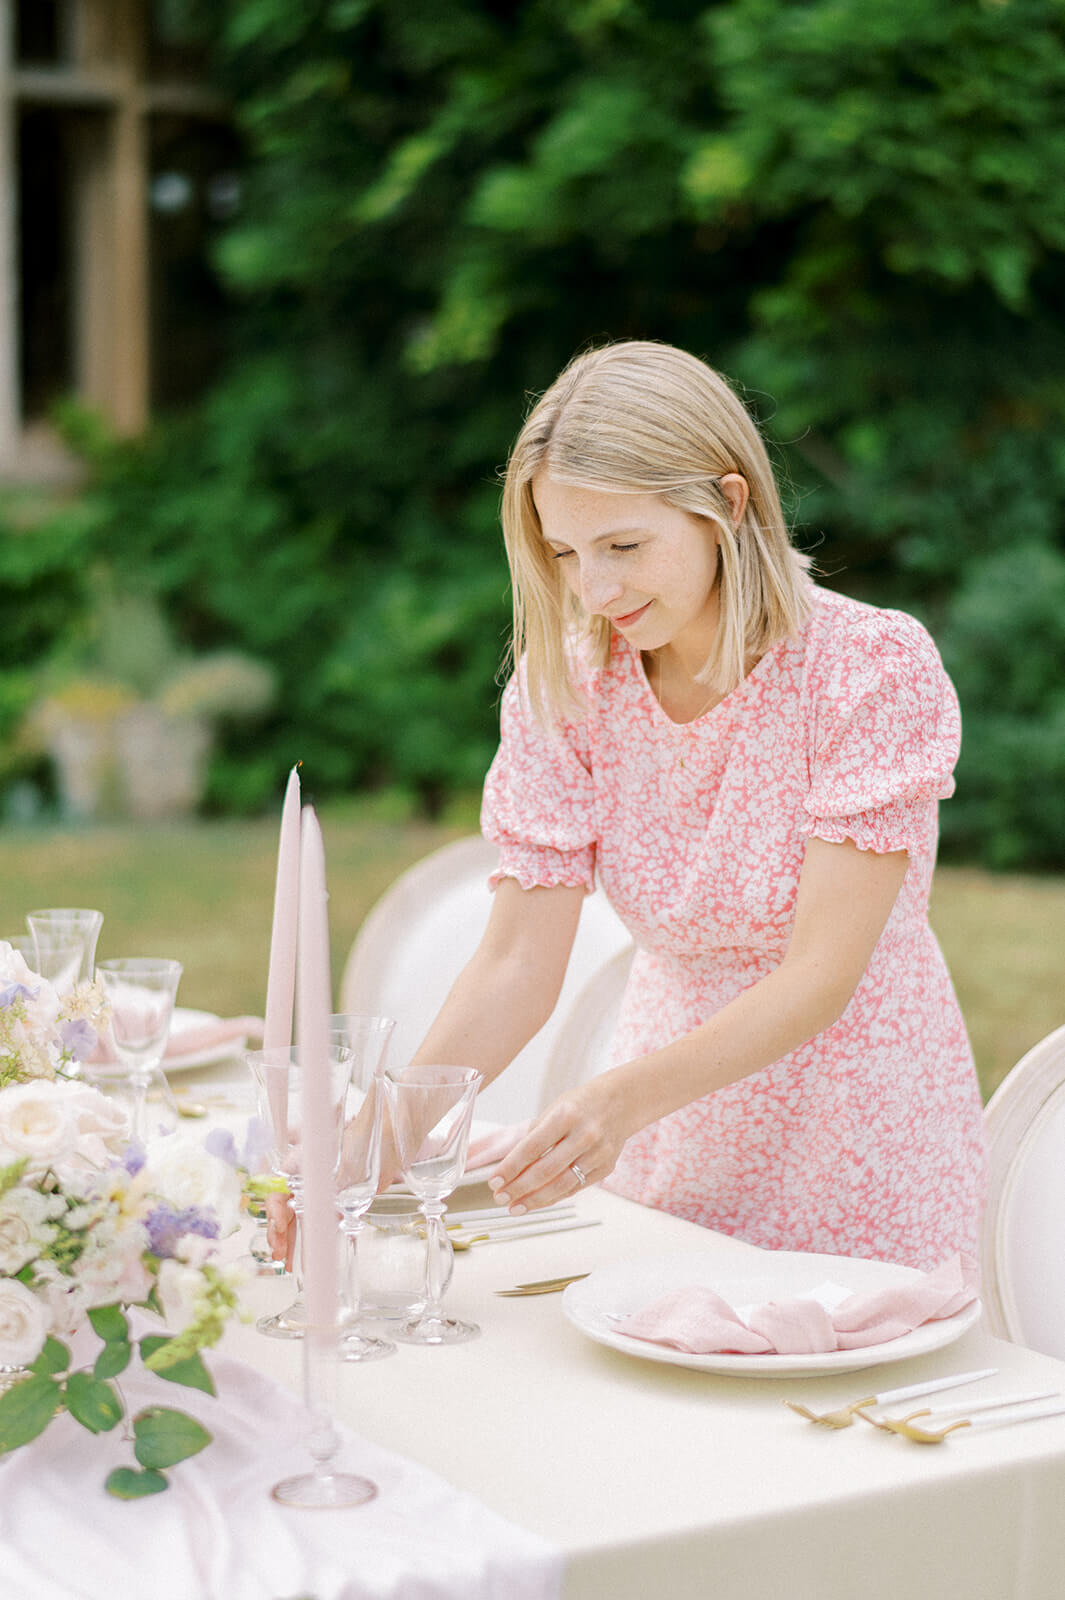 Host Weddings & Events | 8 reasons why you should hire a wedding planner